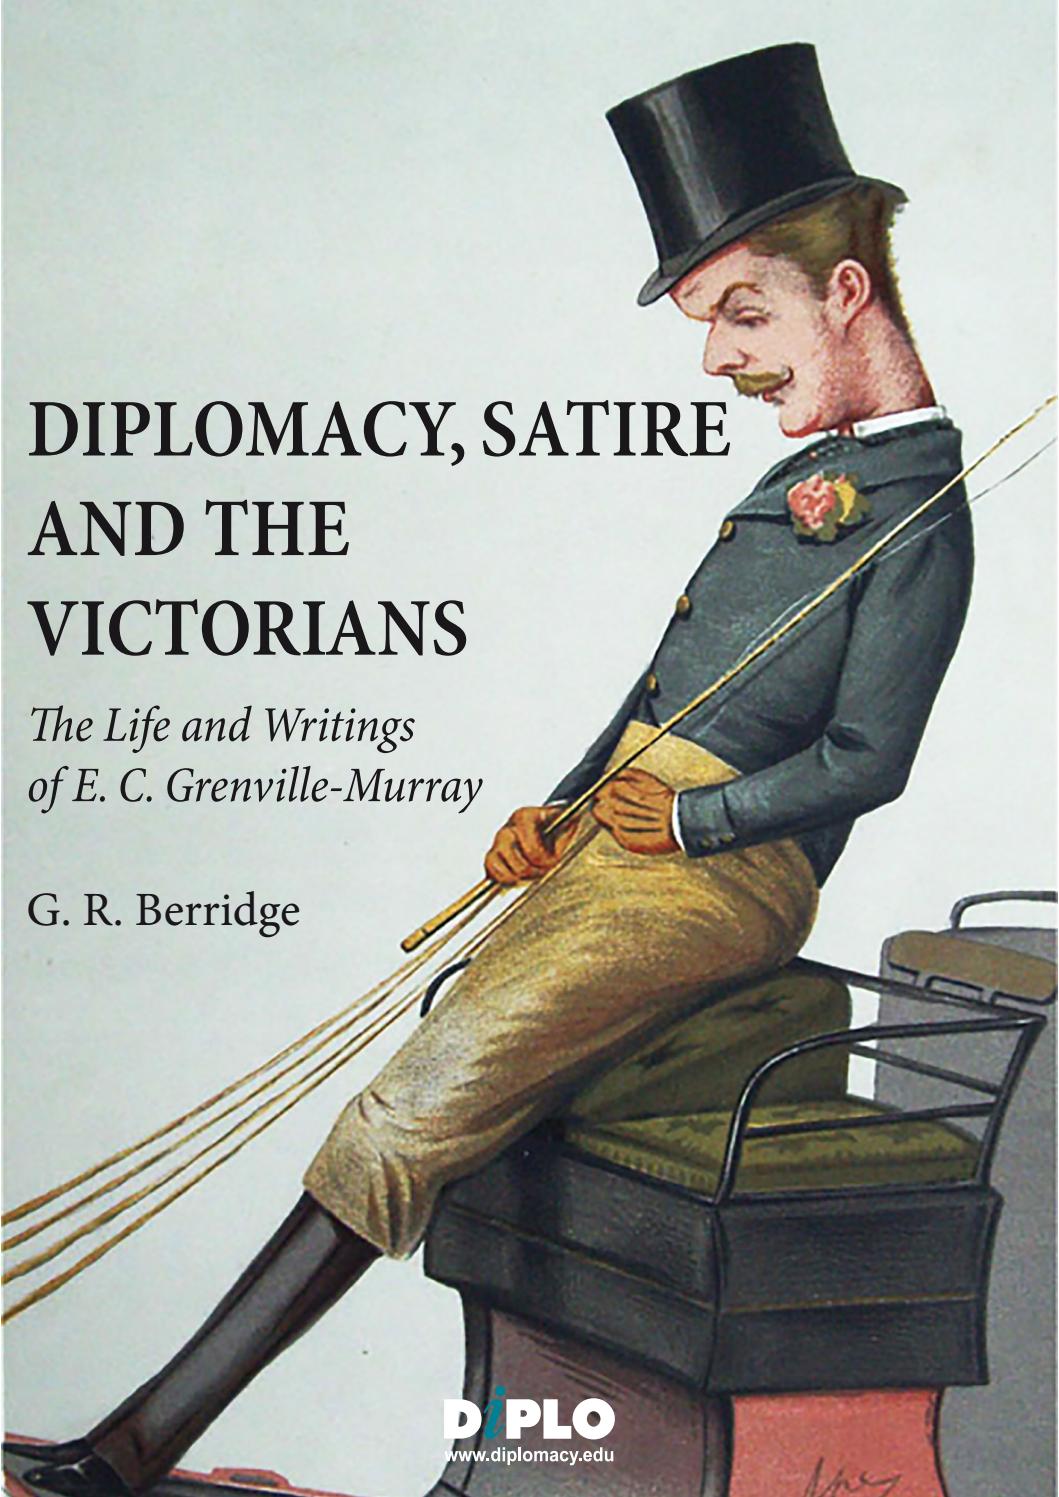 Diplomacy-Satire-and-the-Victorians.jpg